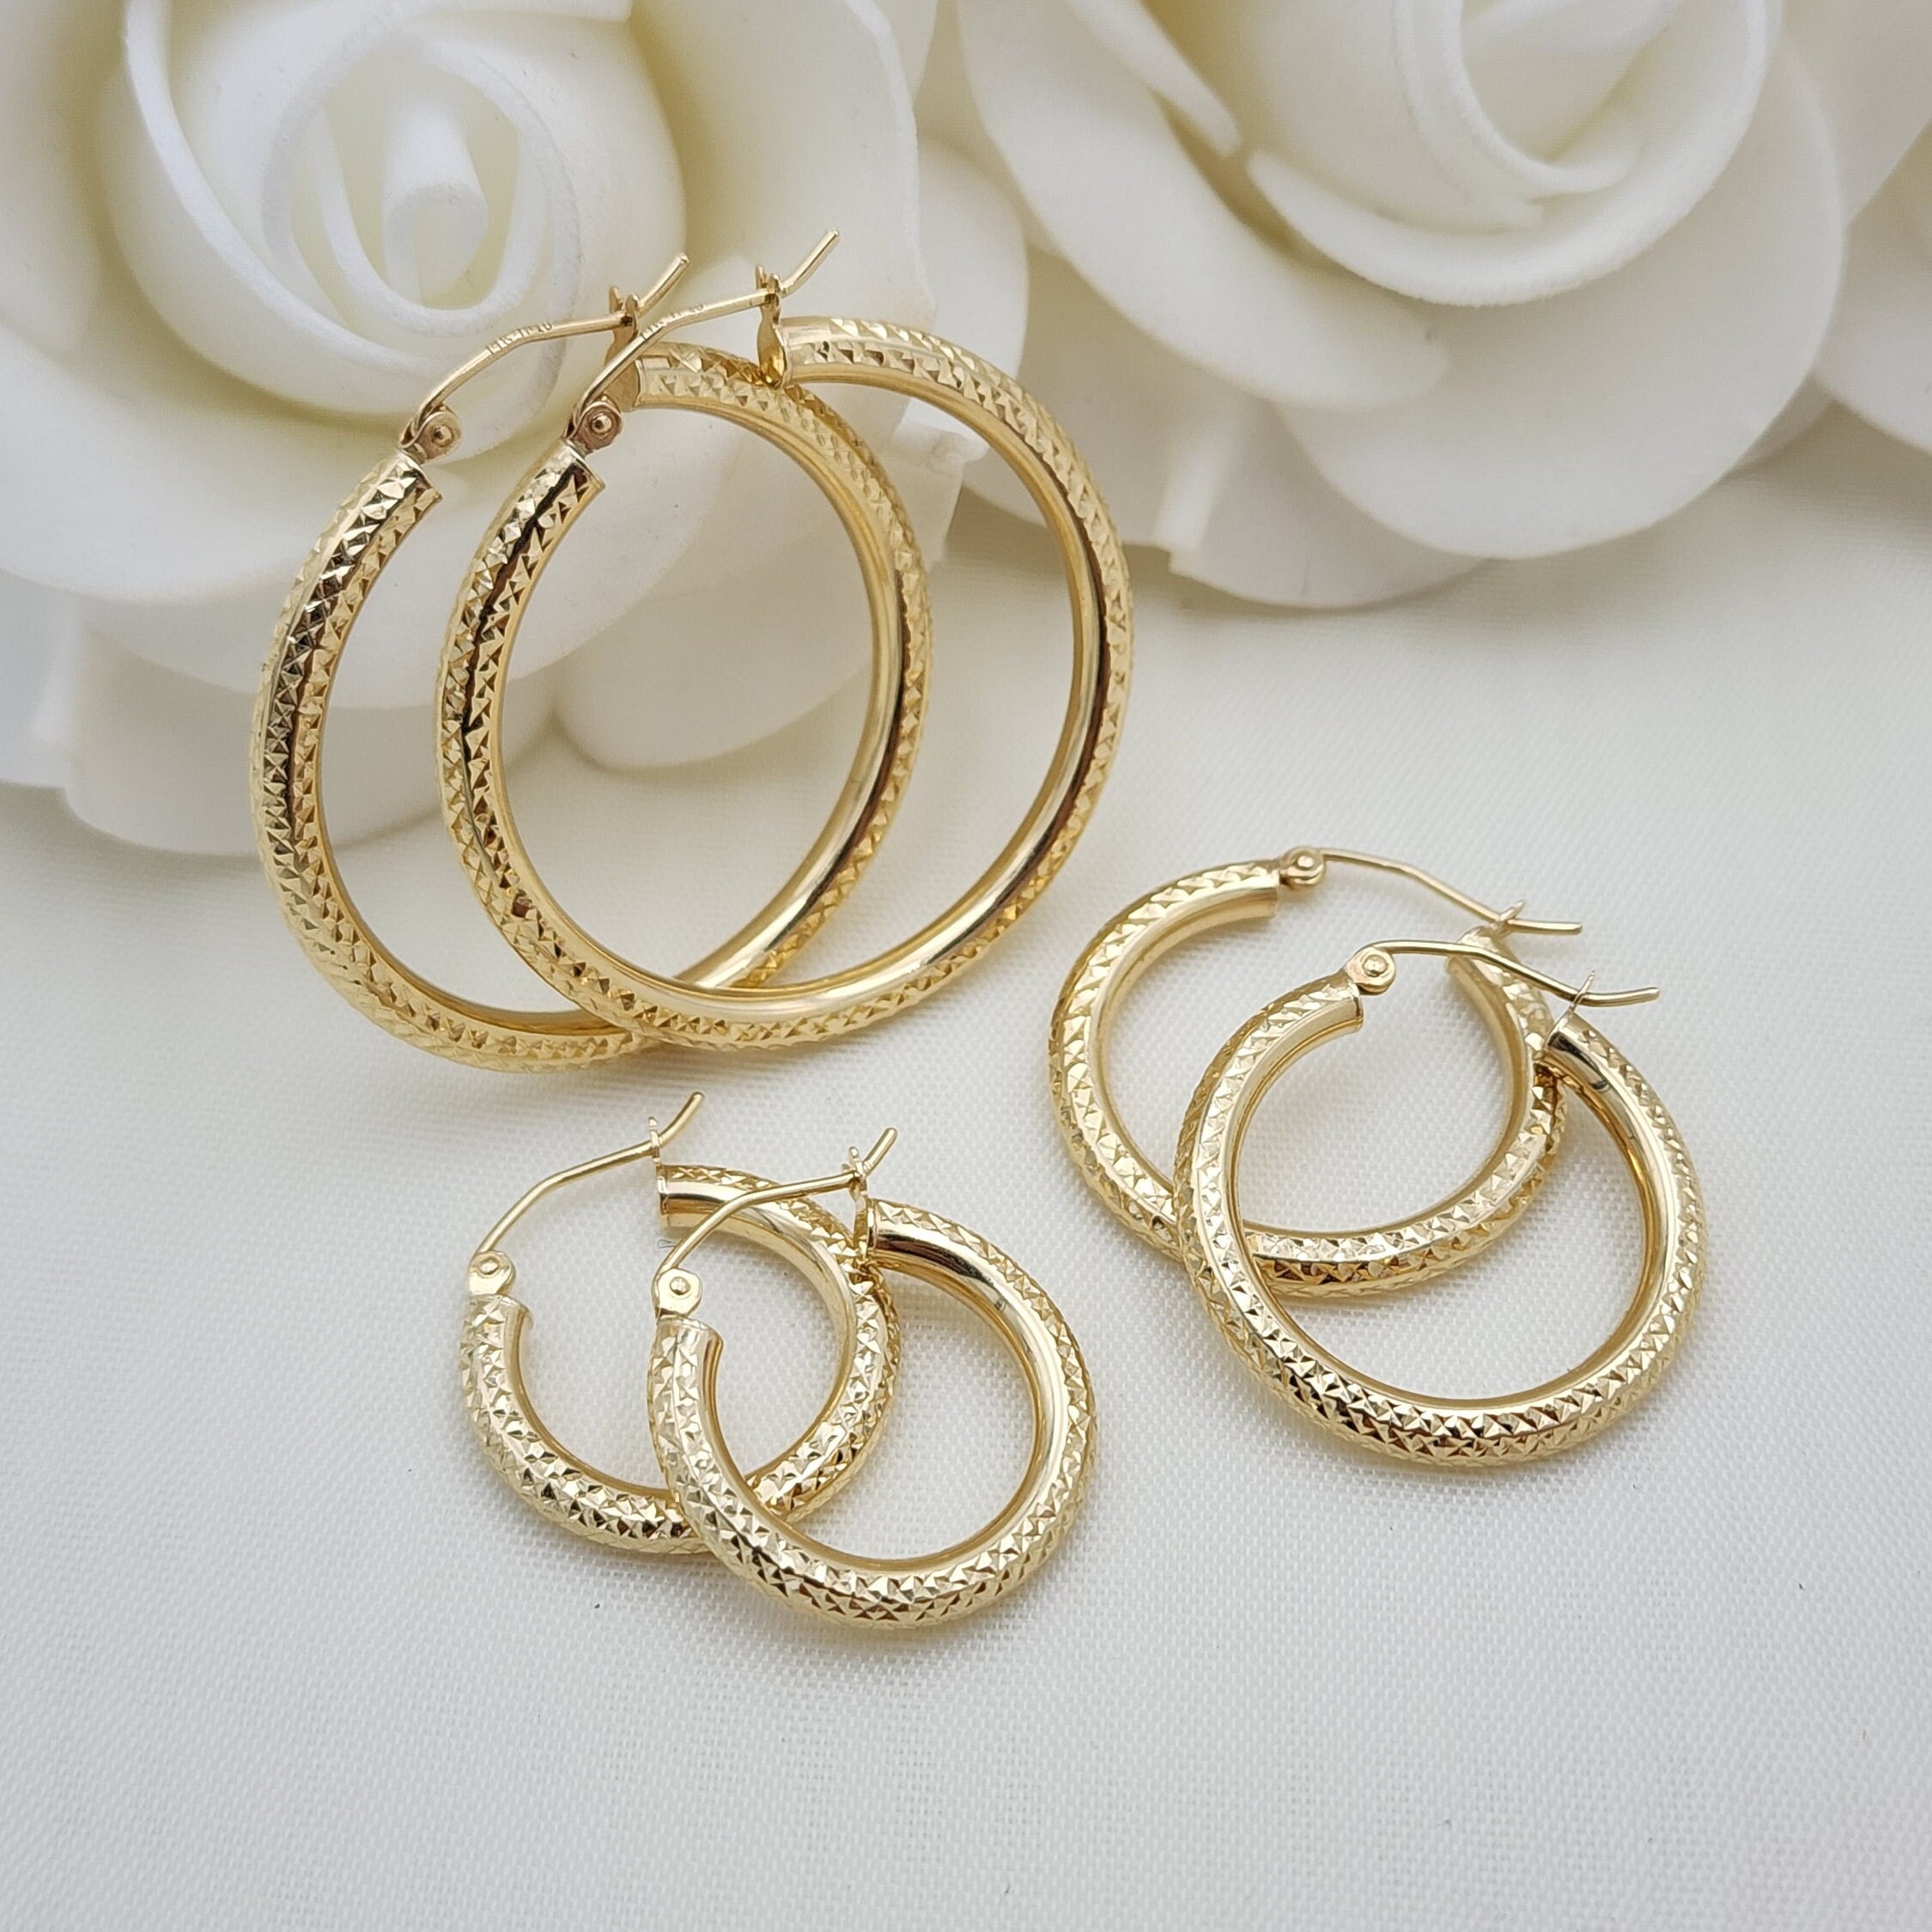 Buy 3mm Thick Gold Hoops Online In India - Etsy India